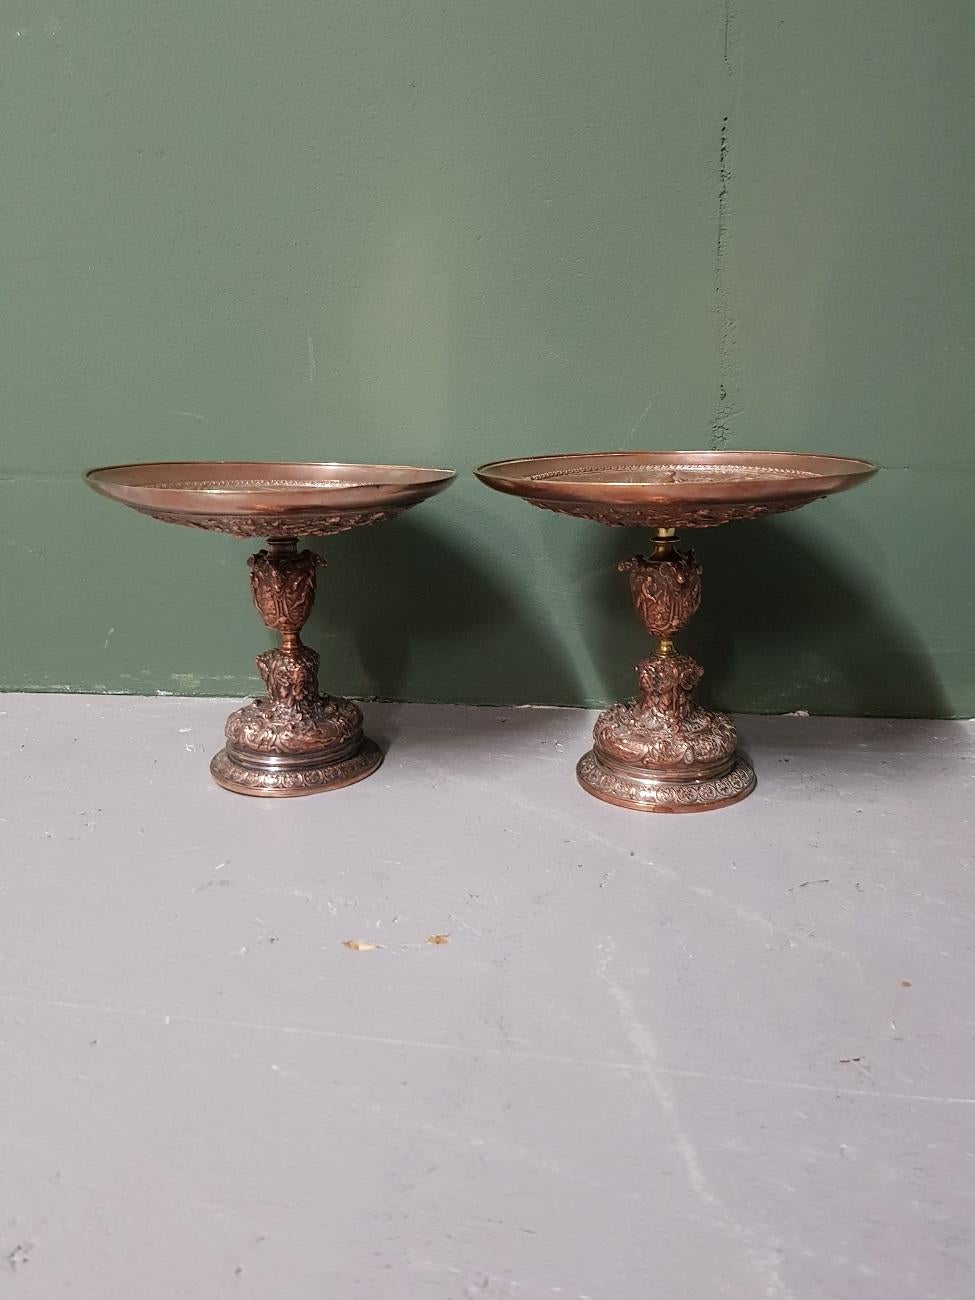 A pair of antique copper plated pewter tazzas with allegorical representations of gods, mythical creatures etc and around Latin words, both wear consistent by age and use and from the late 19th century.

The measurements are,
Depth 18.5cm/ 7.2